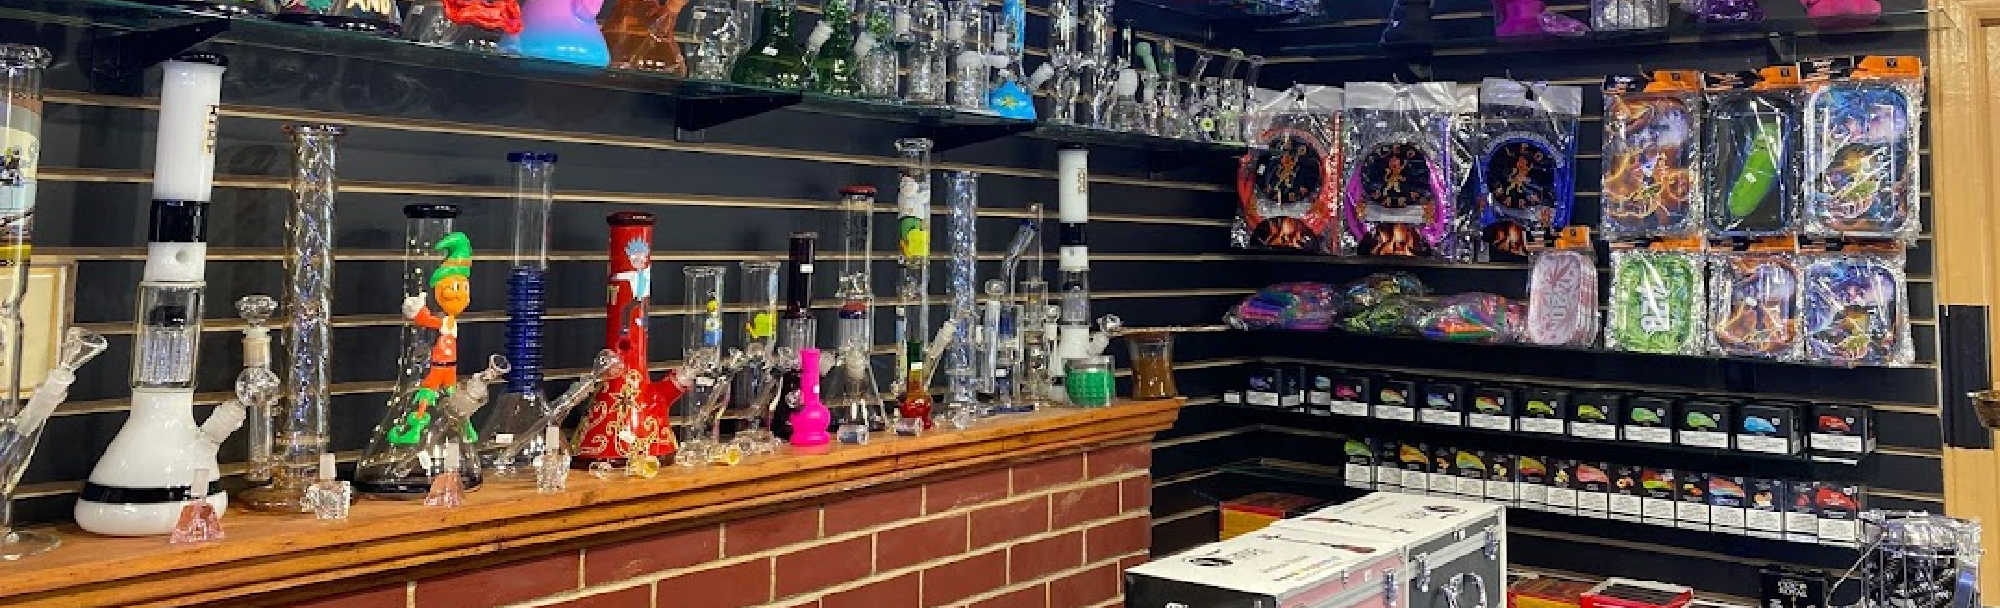 image of all star tobacco & vape in eagan mn